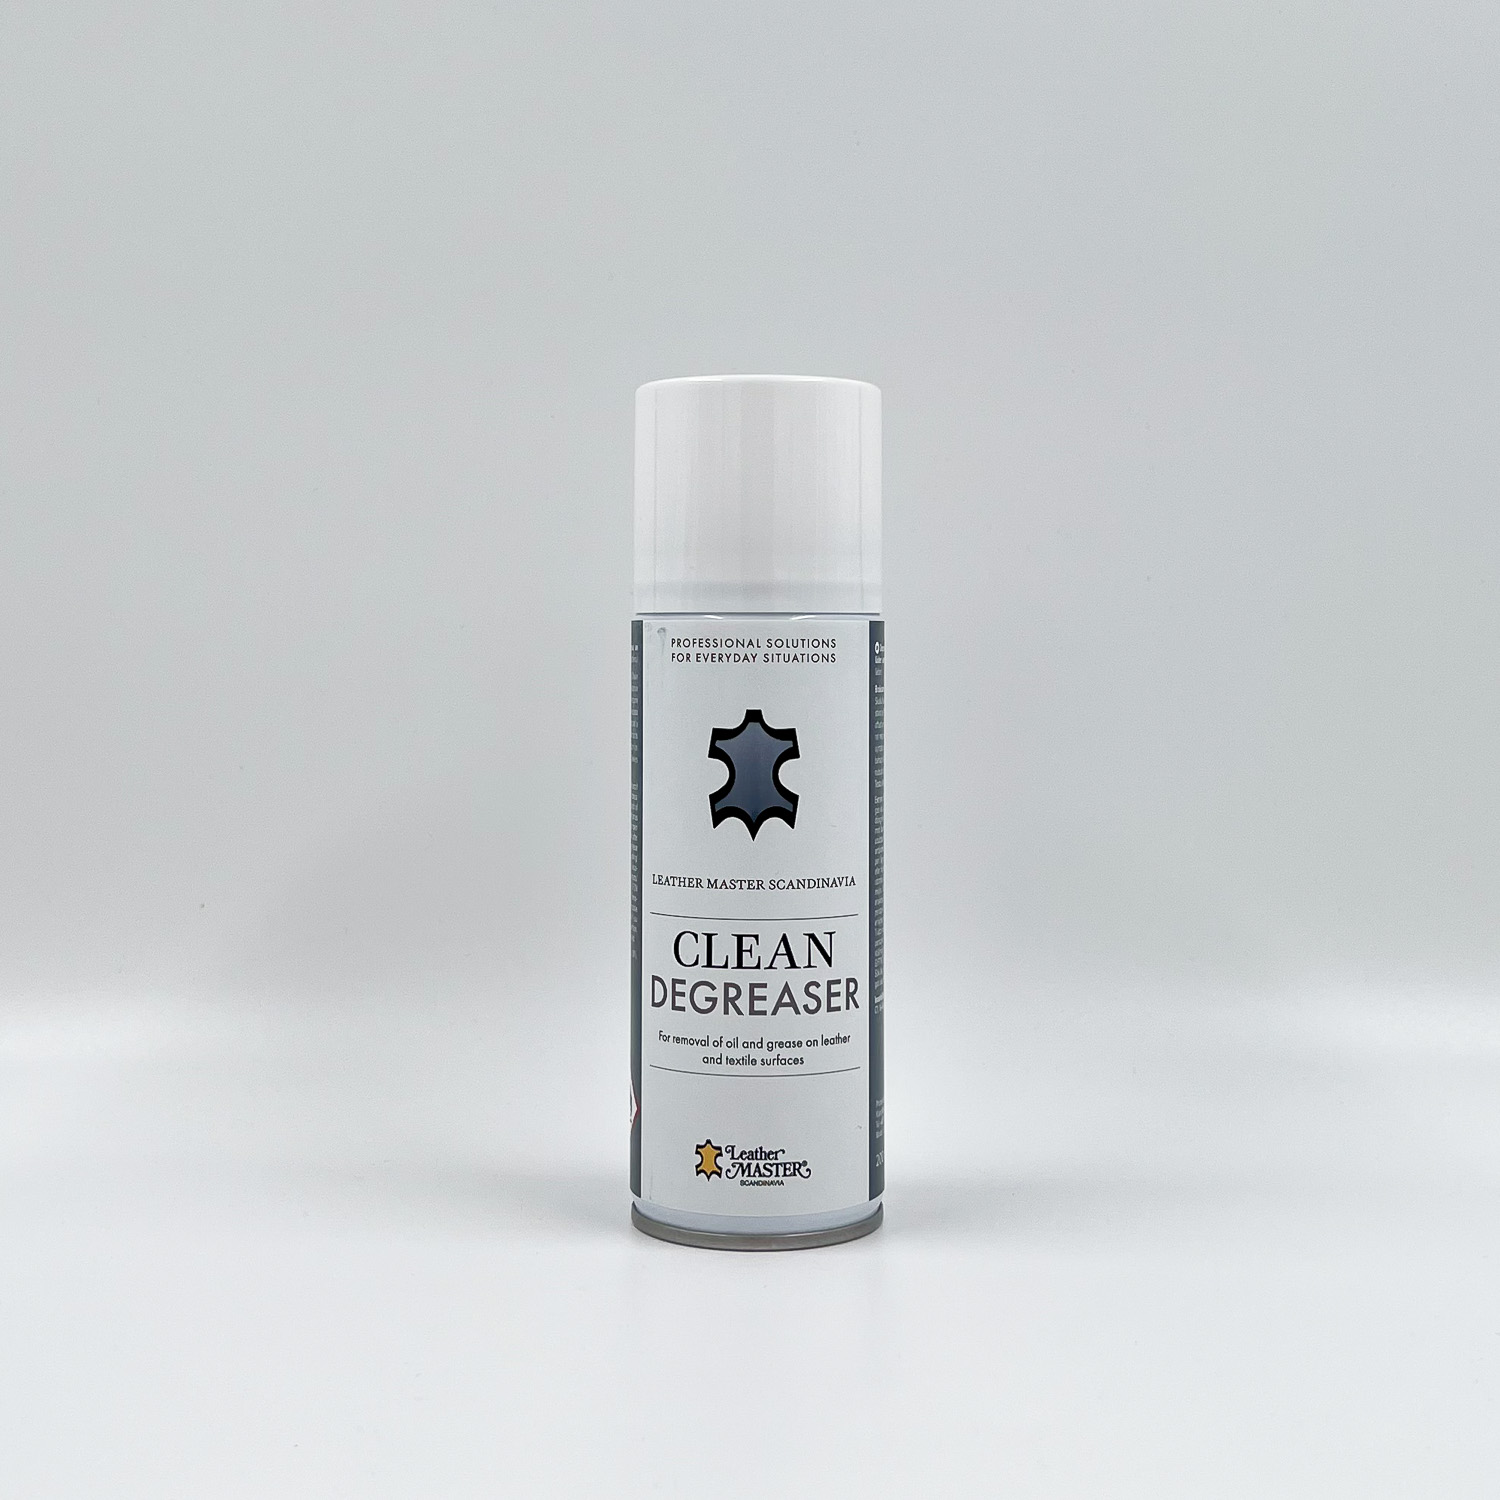 GS27 US140132 Leather Cleaner & Conditioner